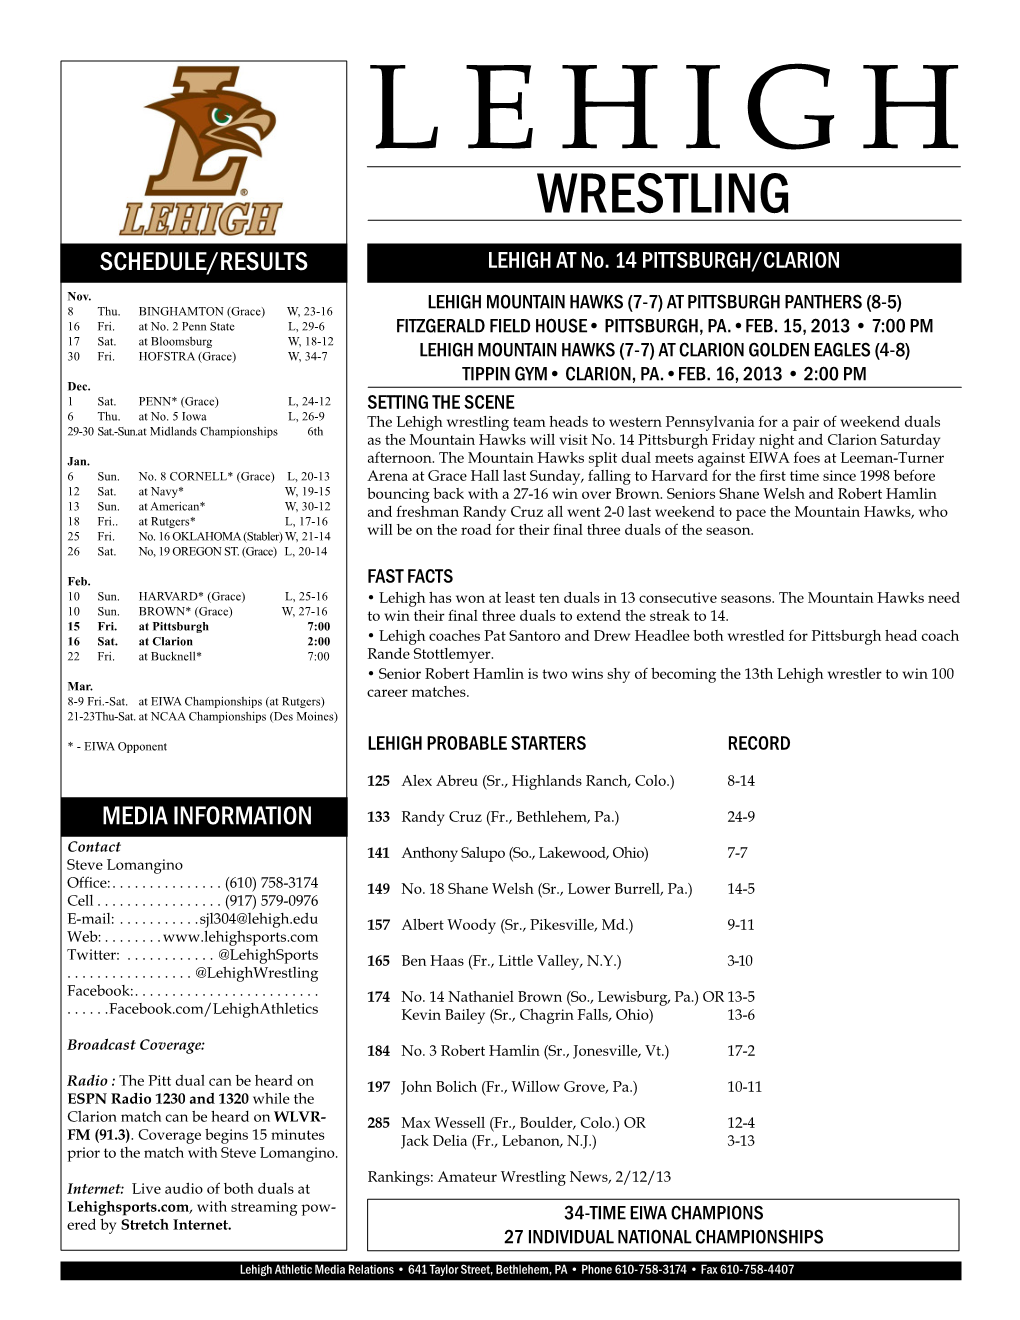 WRESTLING SCHEDULE/RESULTS LEHIGH at No